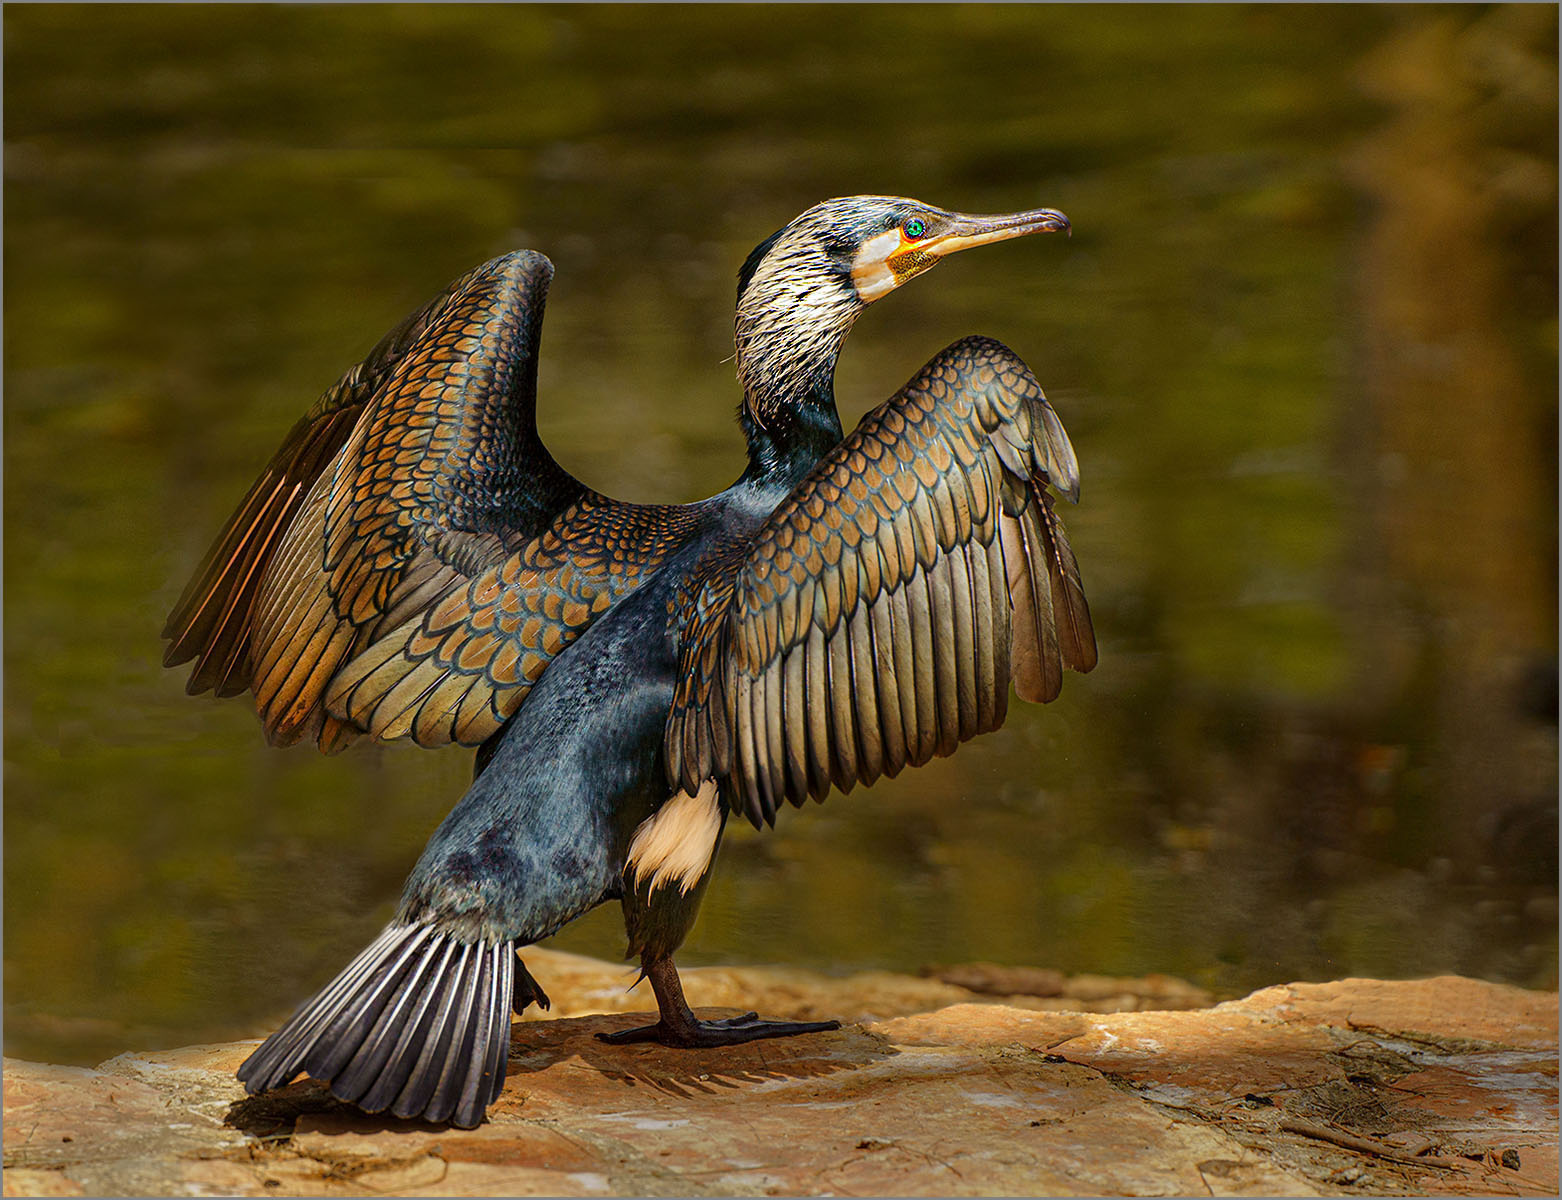 MIDDLE EASTERN GREAT CORMORANT by Malcolm Nabarro